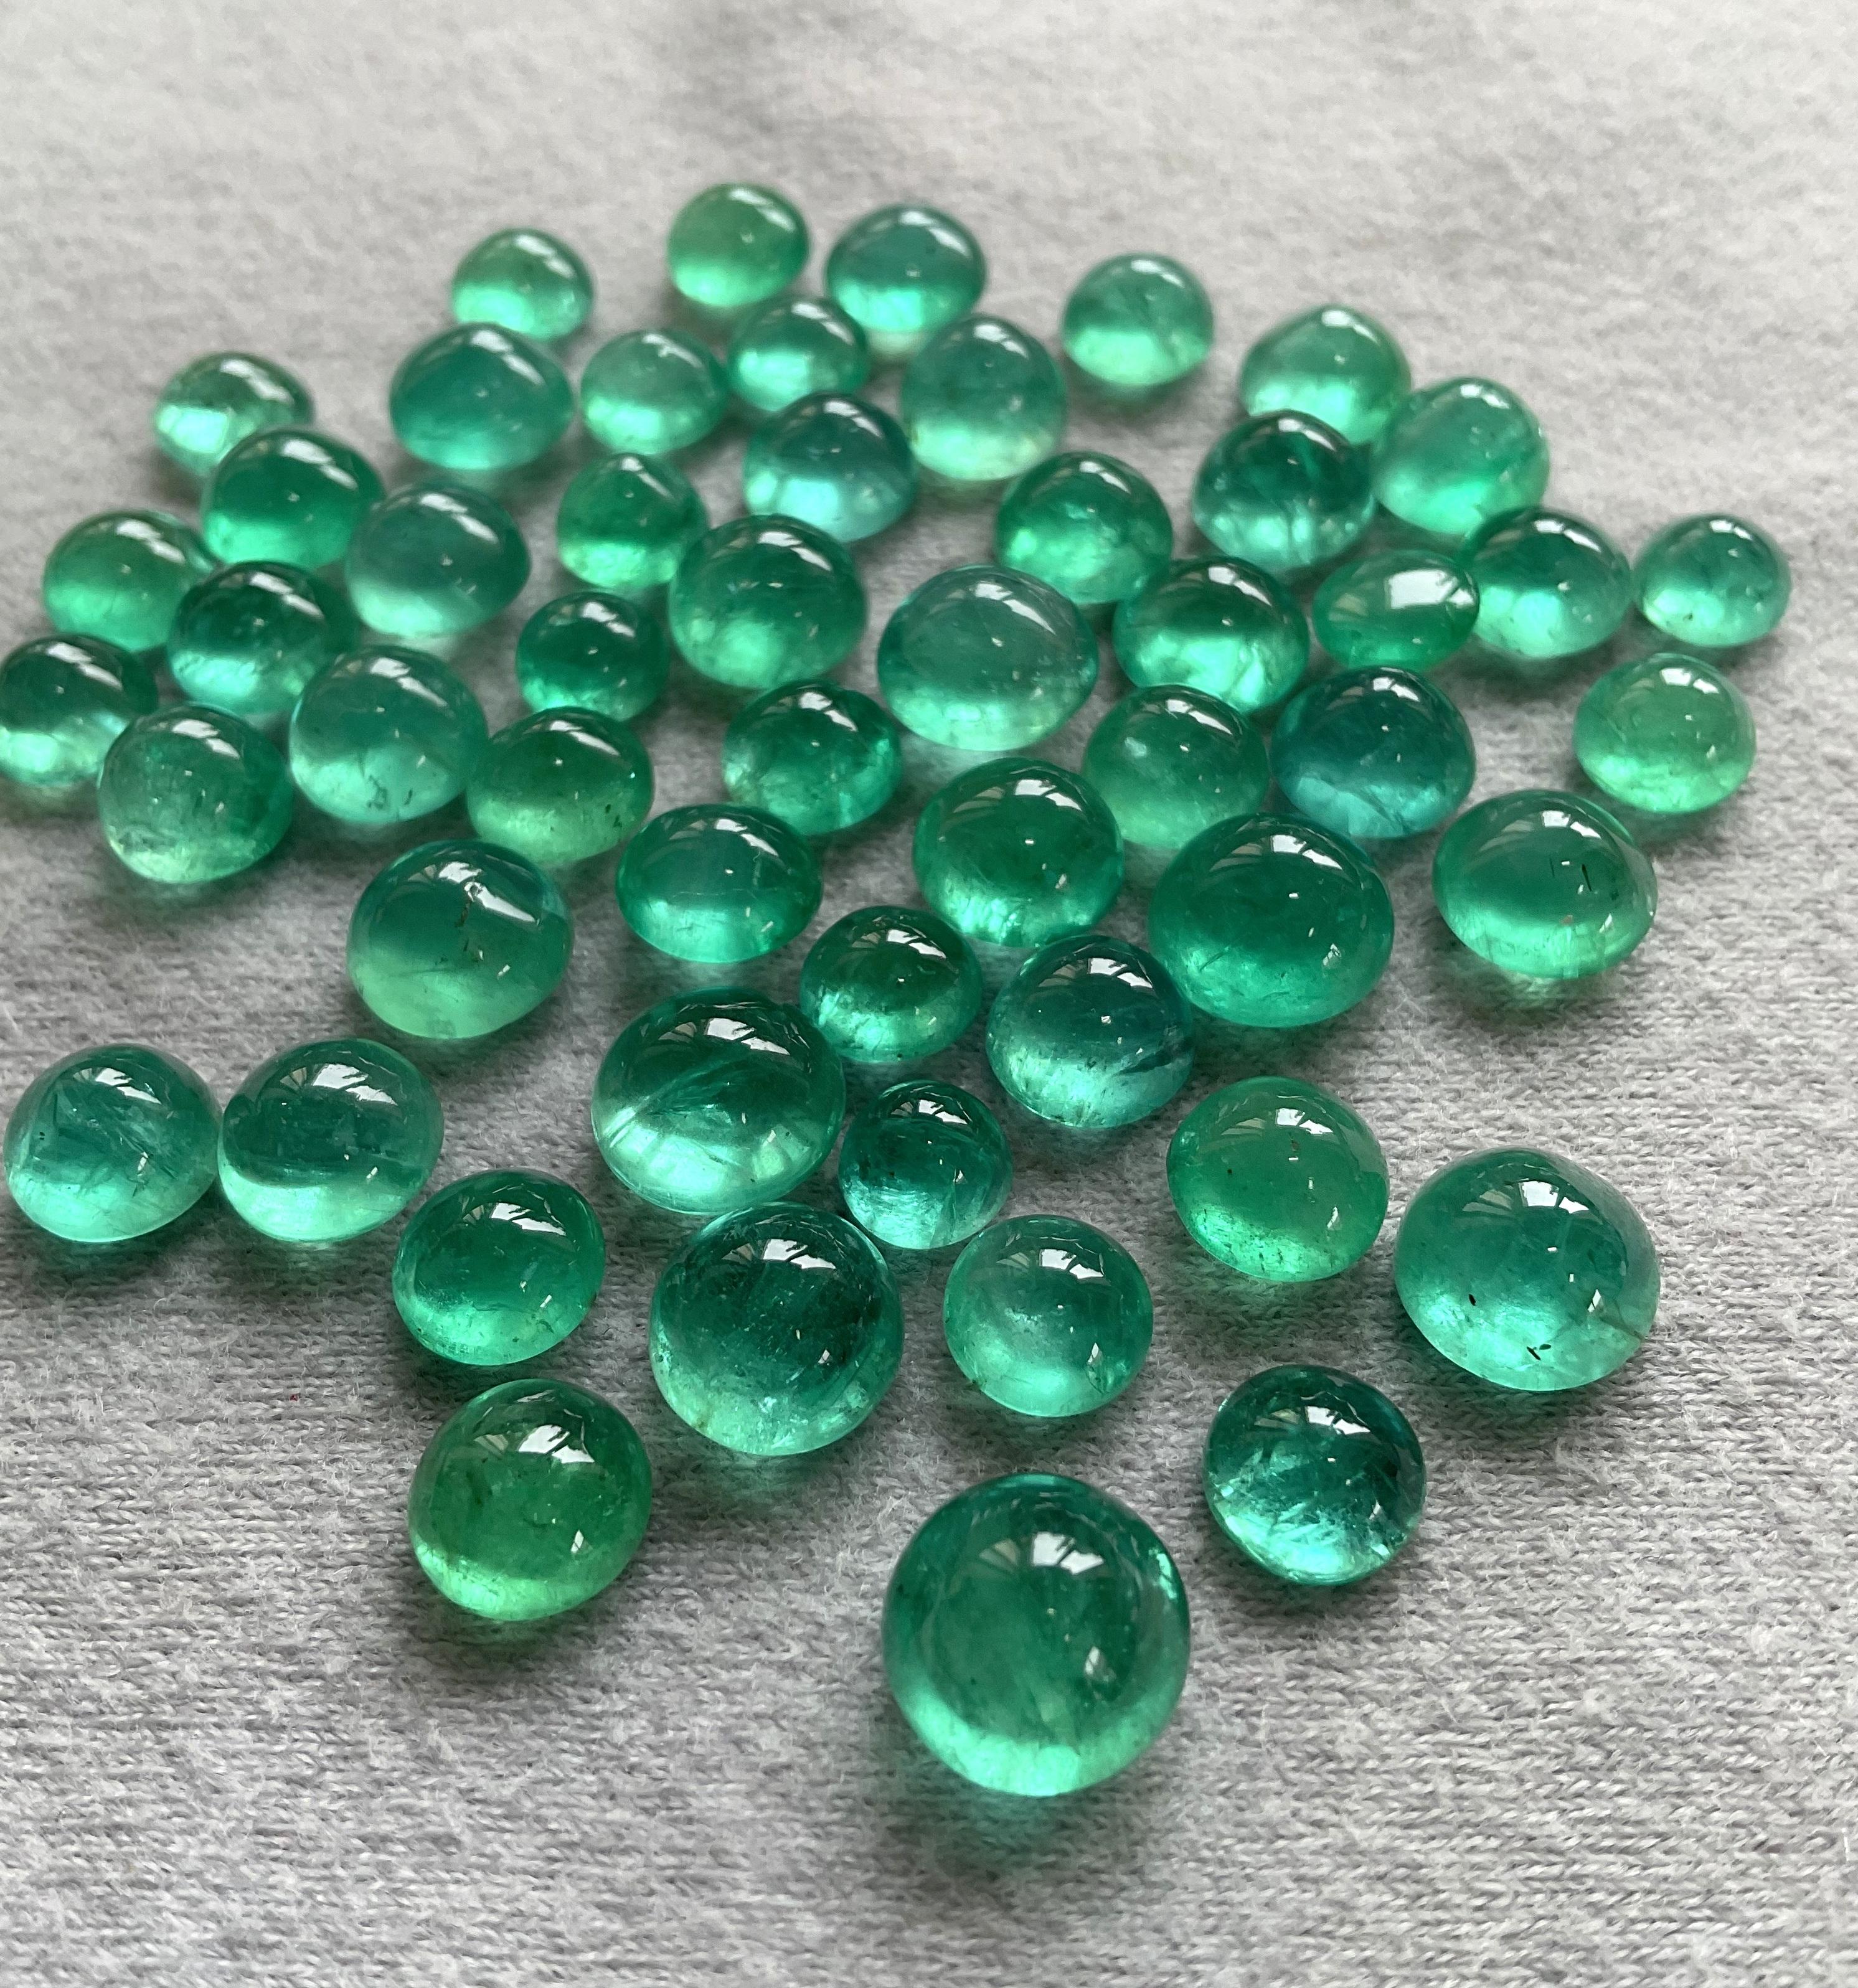 Round Cut 111.00 carats Zambian Emerald Round Plain Cabs Top Quality For Jewelry Gemstone  For Sale